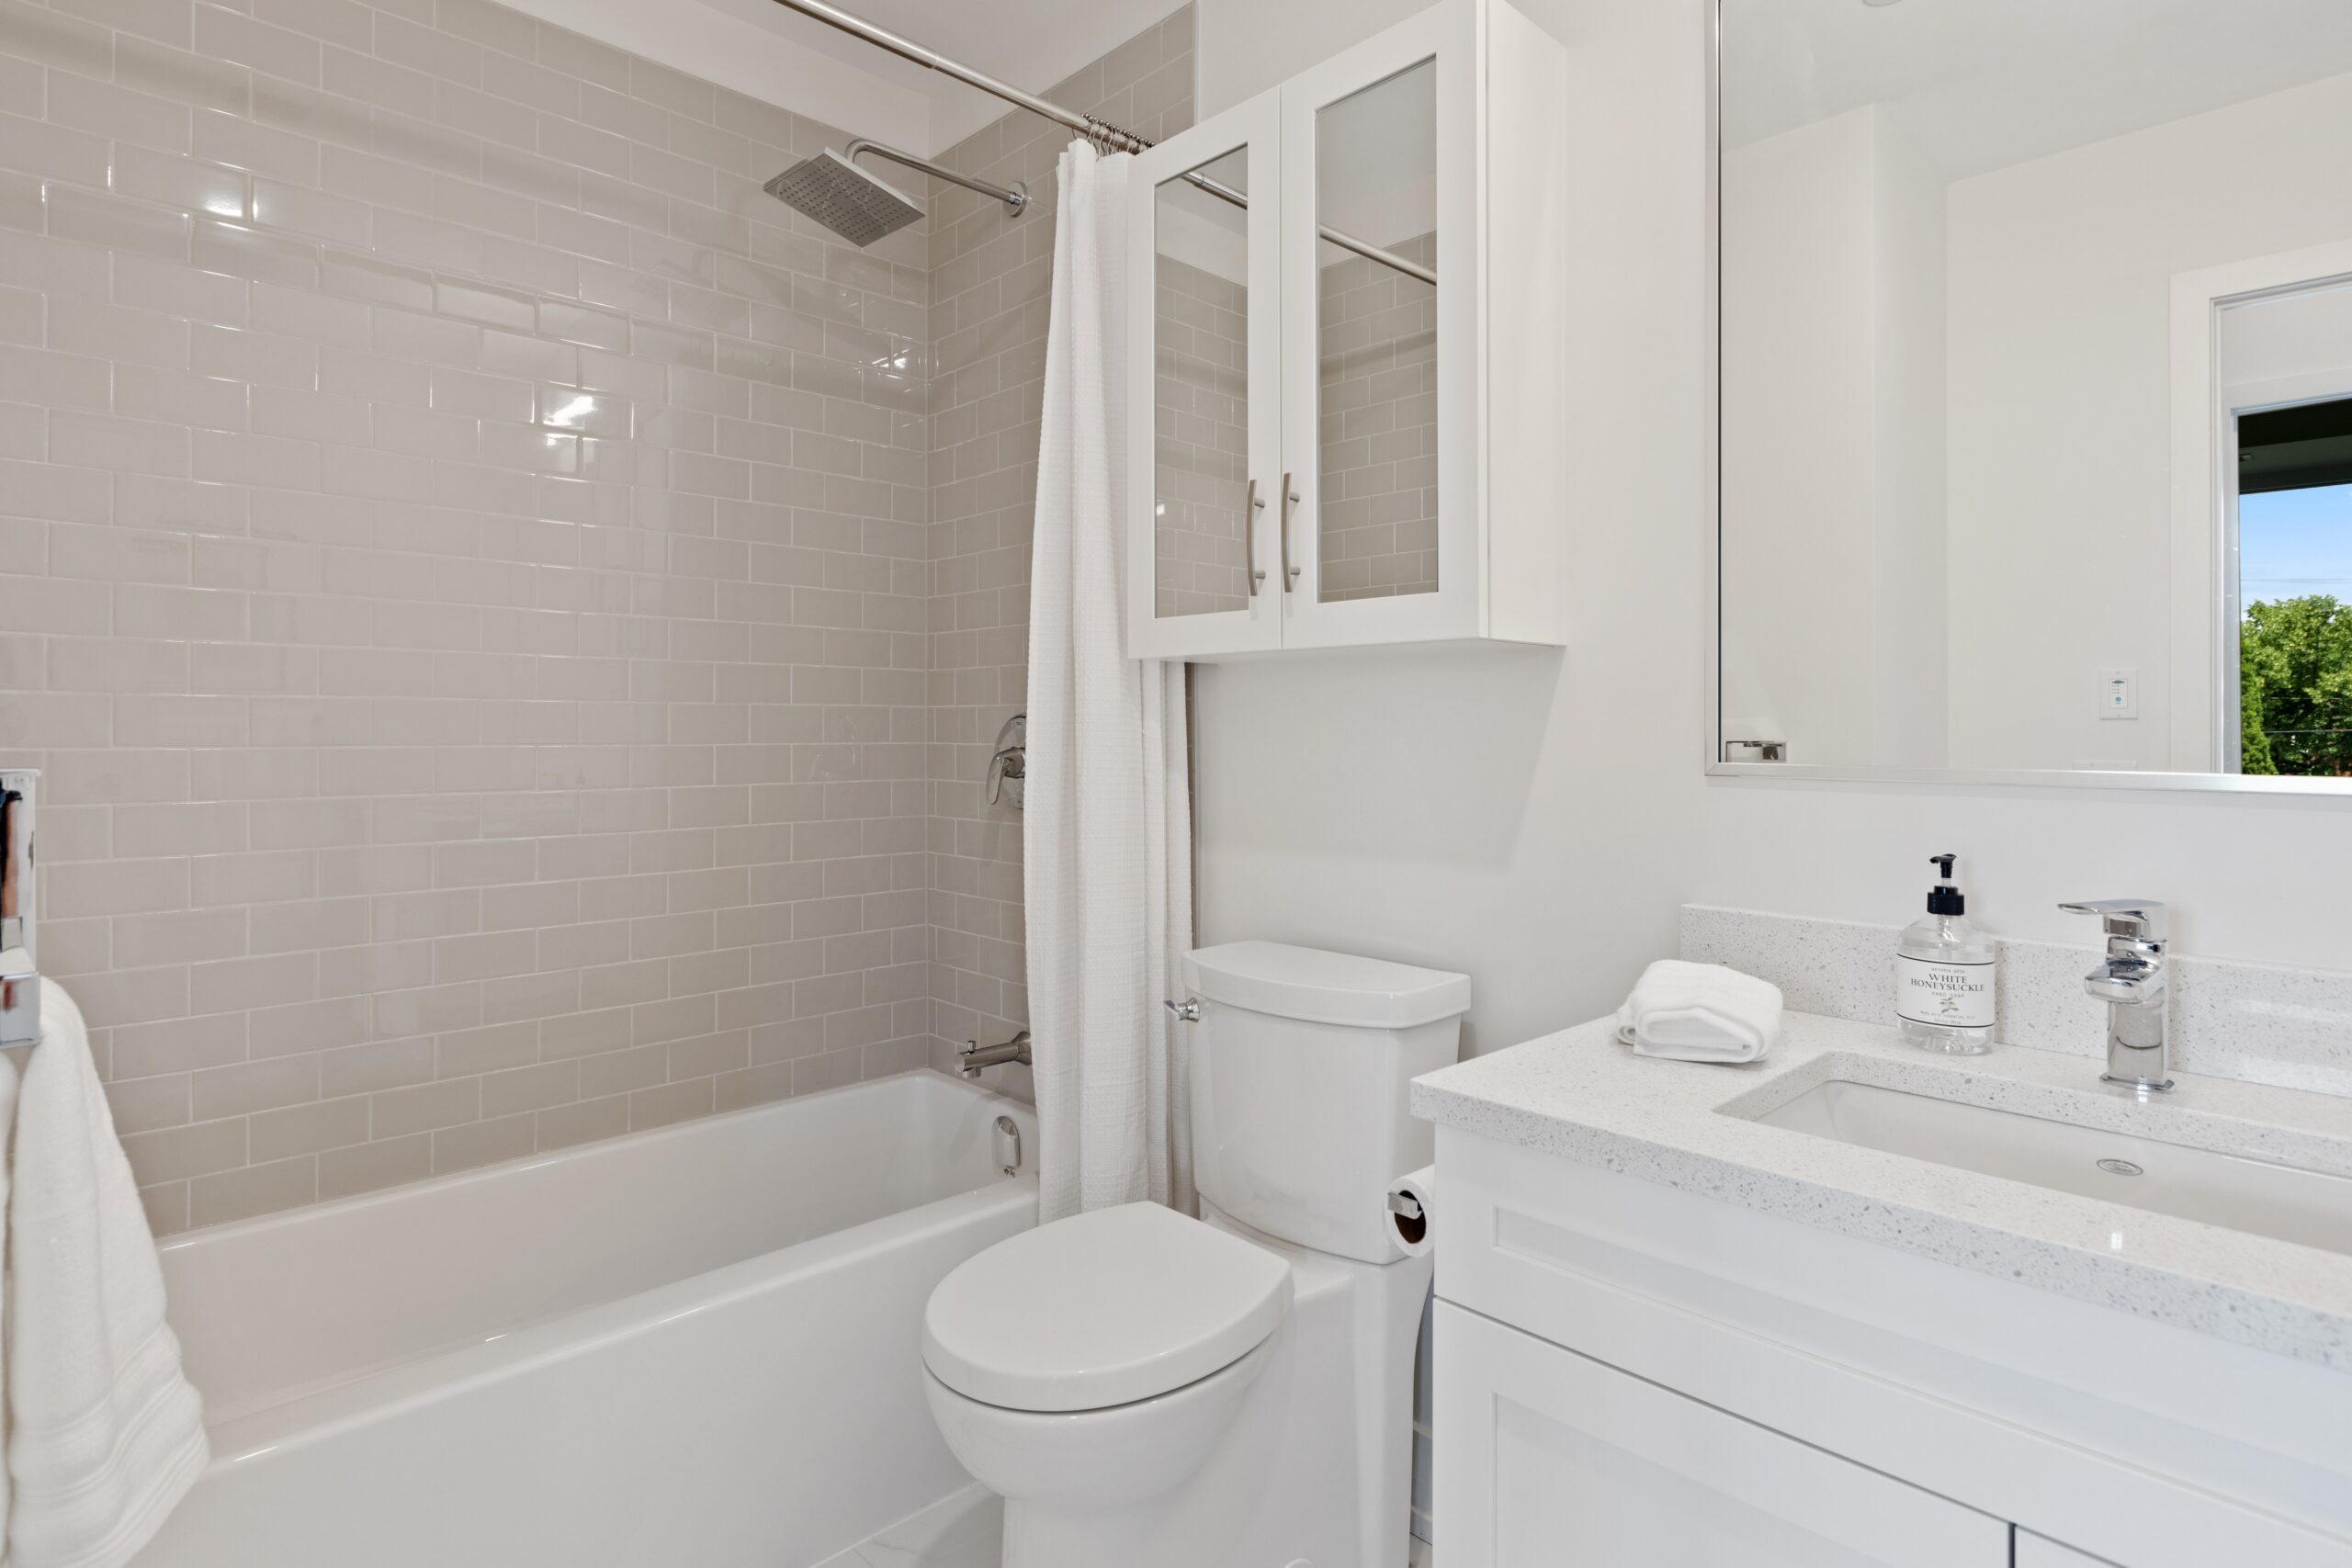 Maximizing Space: 7 Storage Solutions for Small Bathrooms